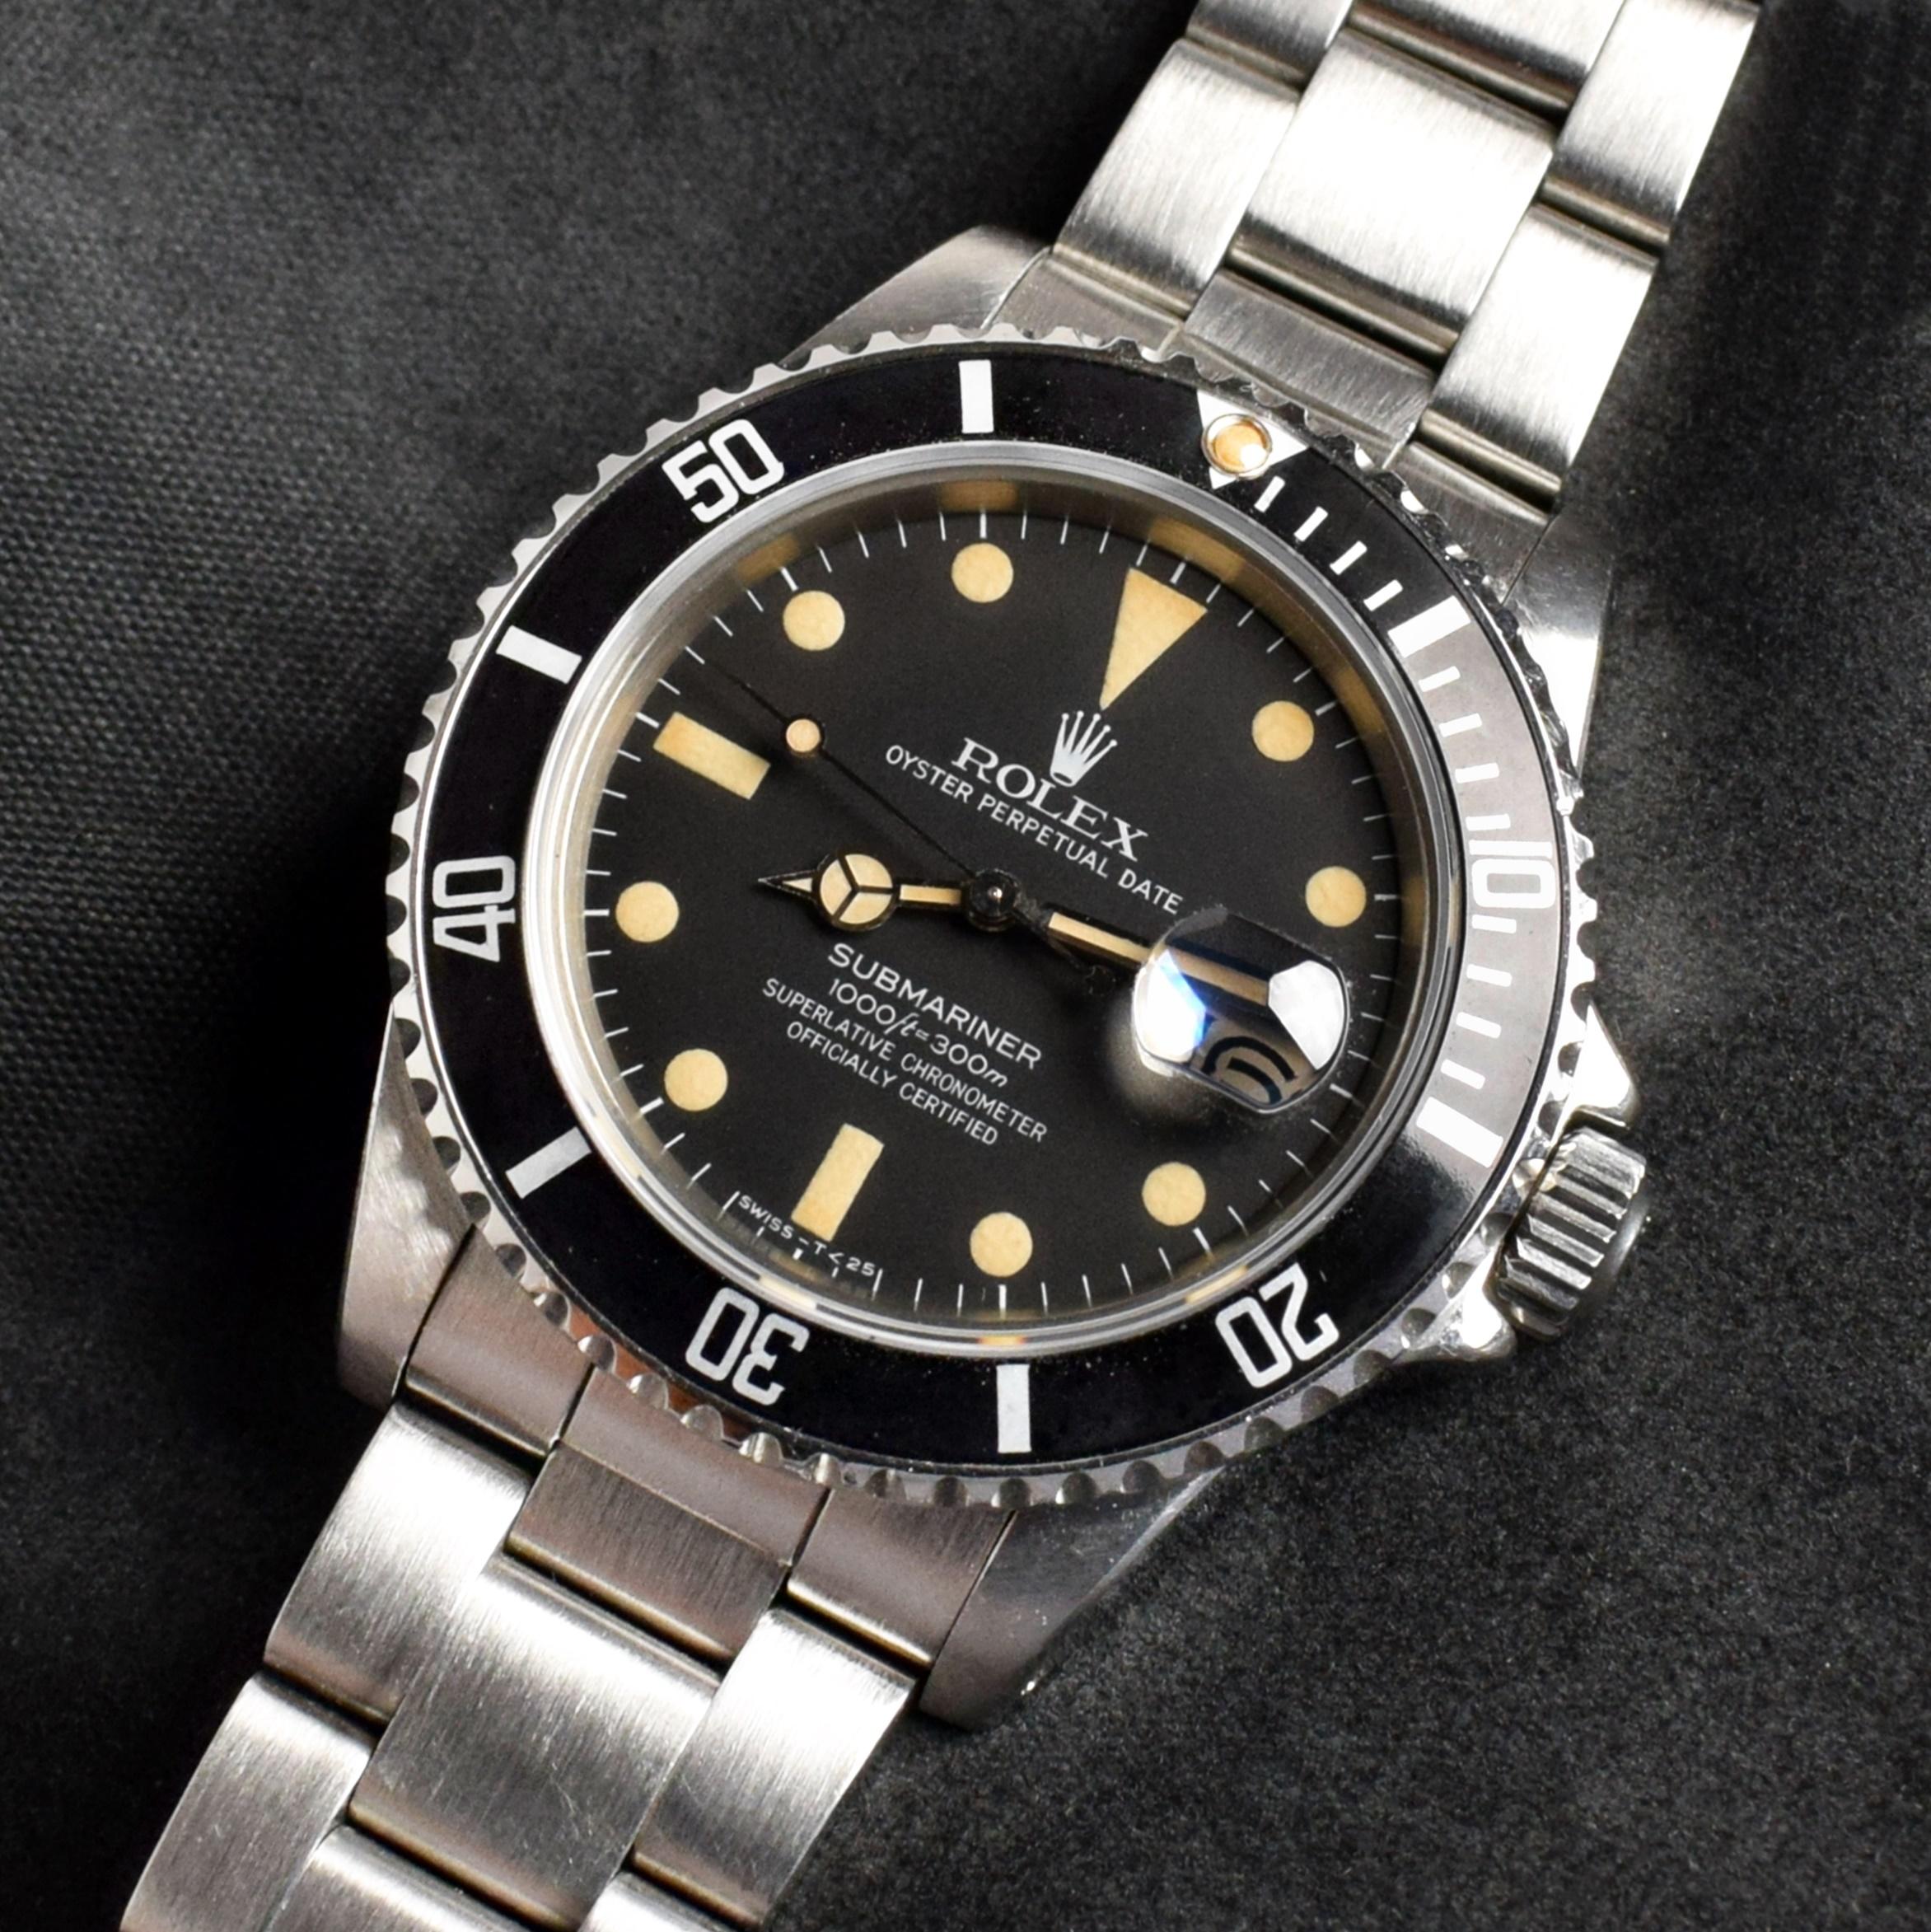 Brand: Rolex
Model: 16800
Year: 1981
Serial number: 66xxxxx
Reference: C03452

Case: Show heavy sign of wear super strong case with slight polish from previous; inner case back stamped 16800

Dial: Excellent Aged Condition Matte Dial where the lumes